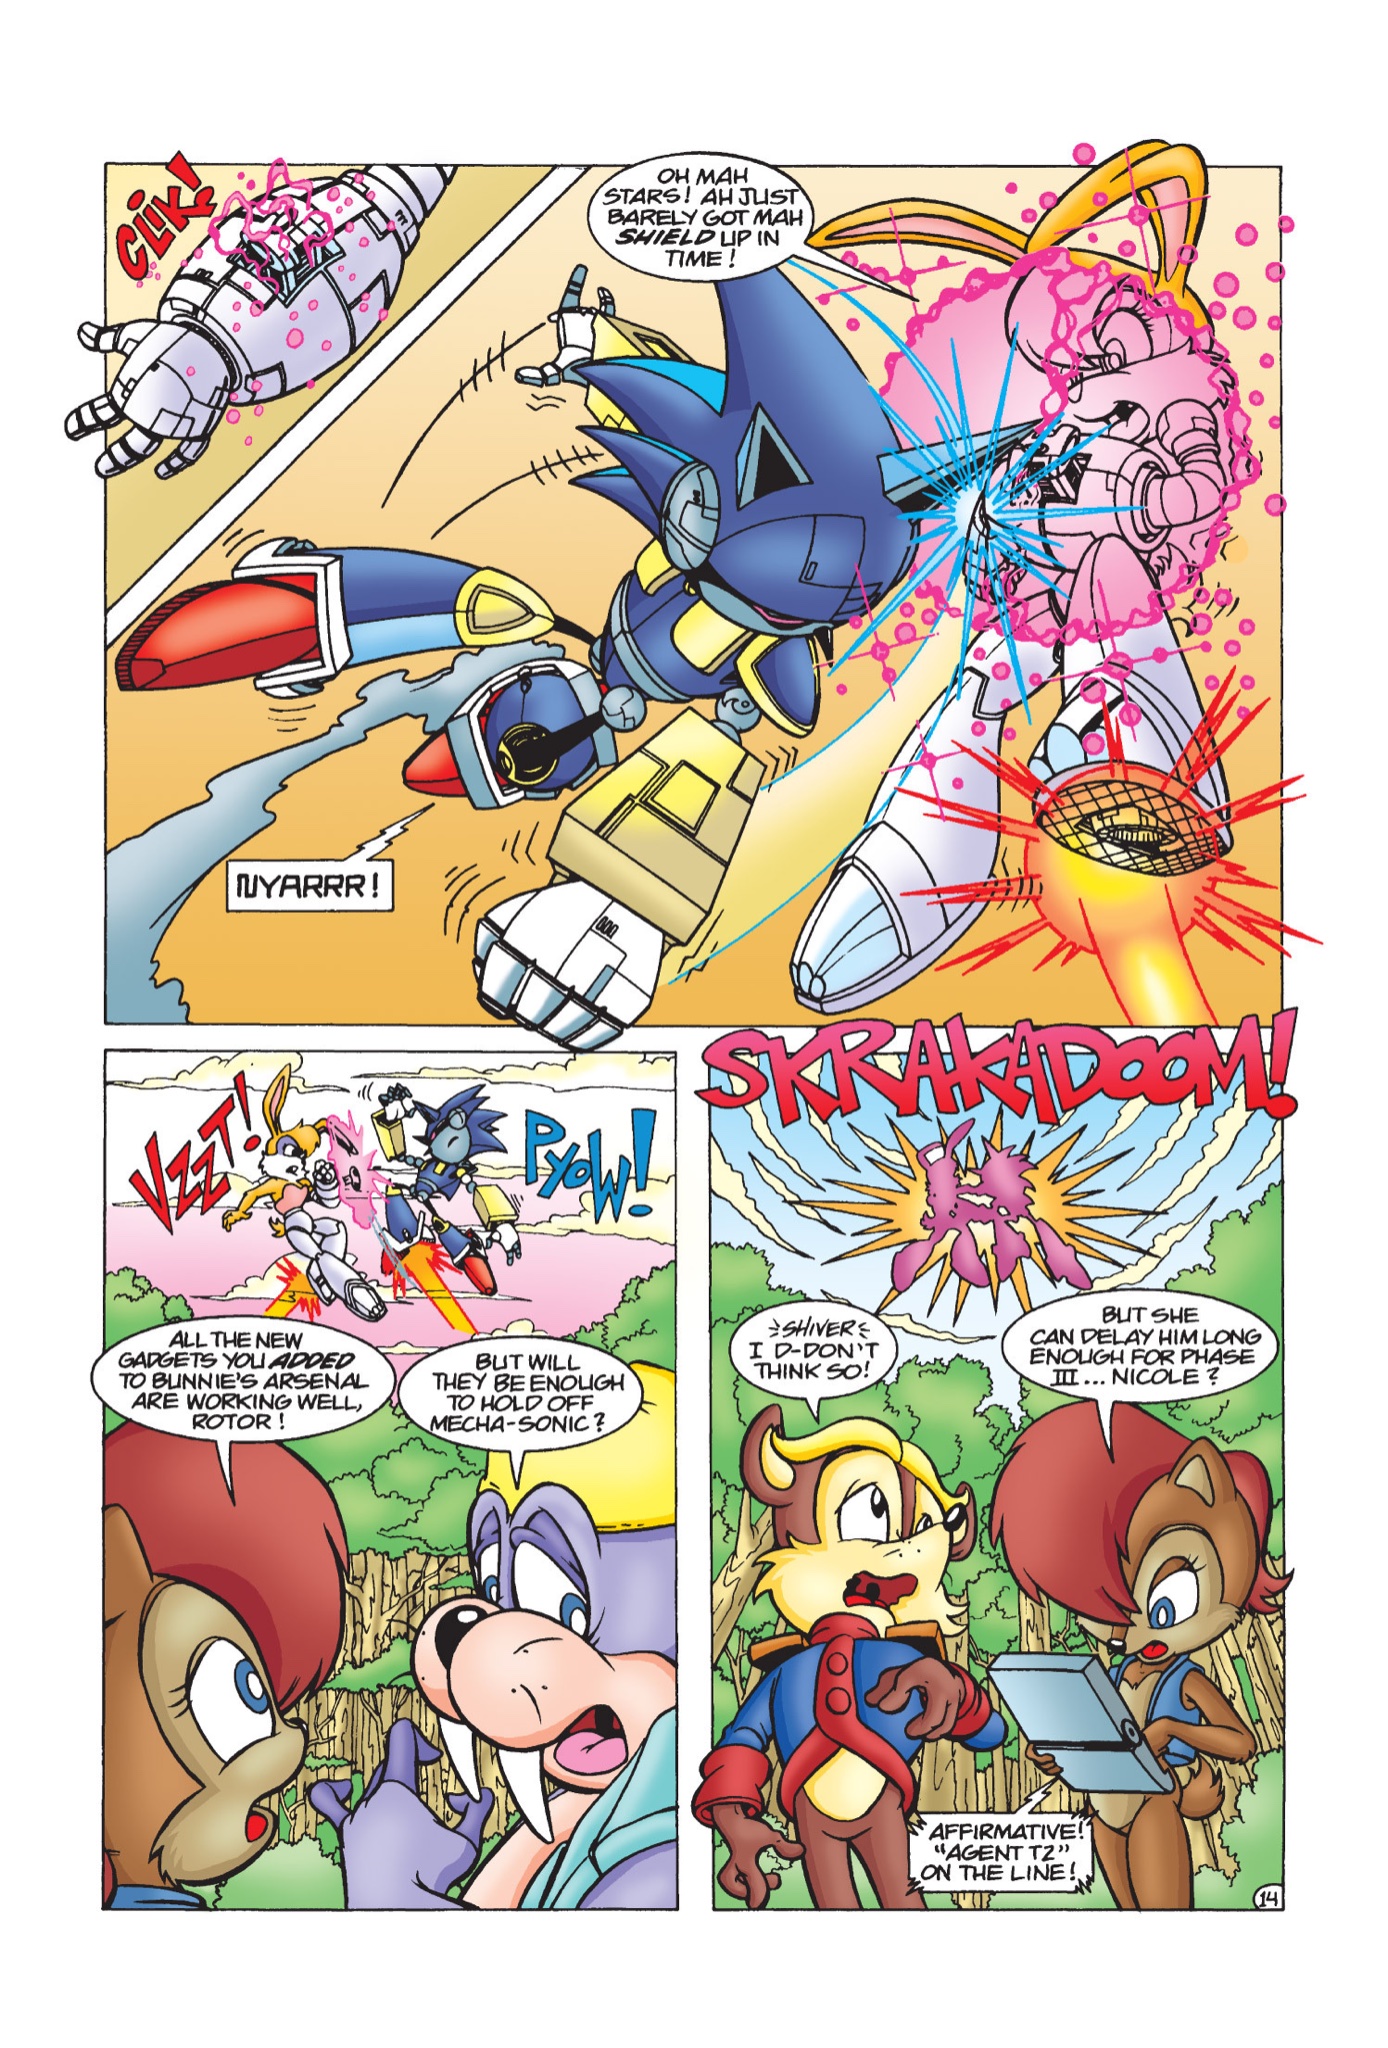 The Mecha Sonic StoryContinued! 